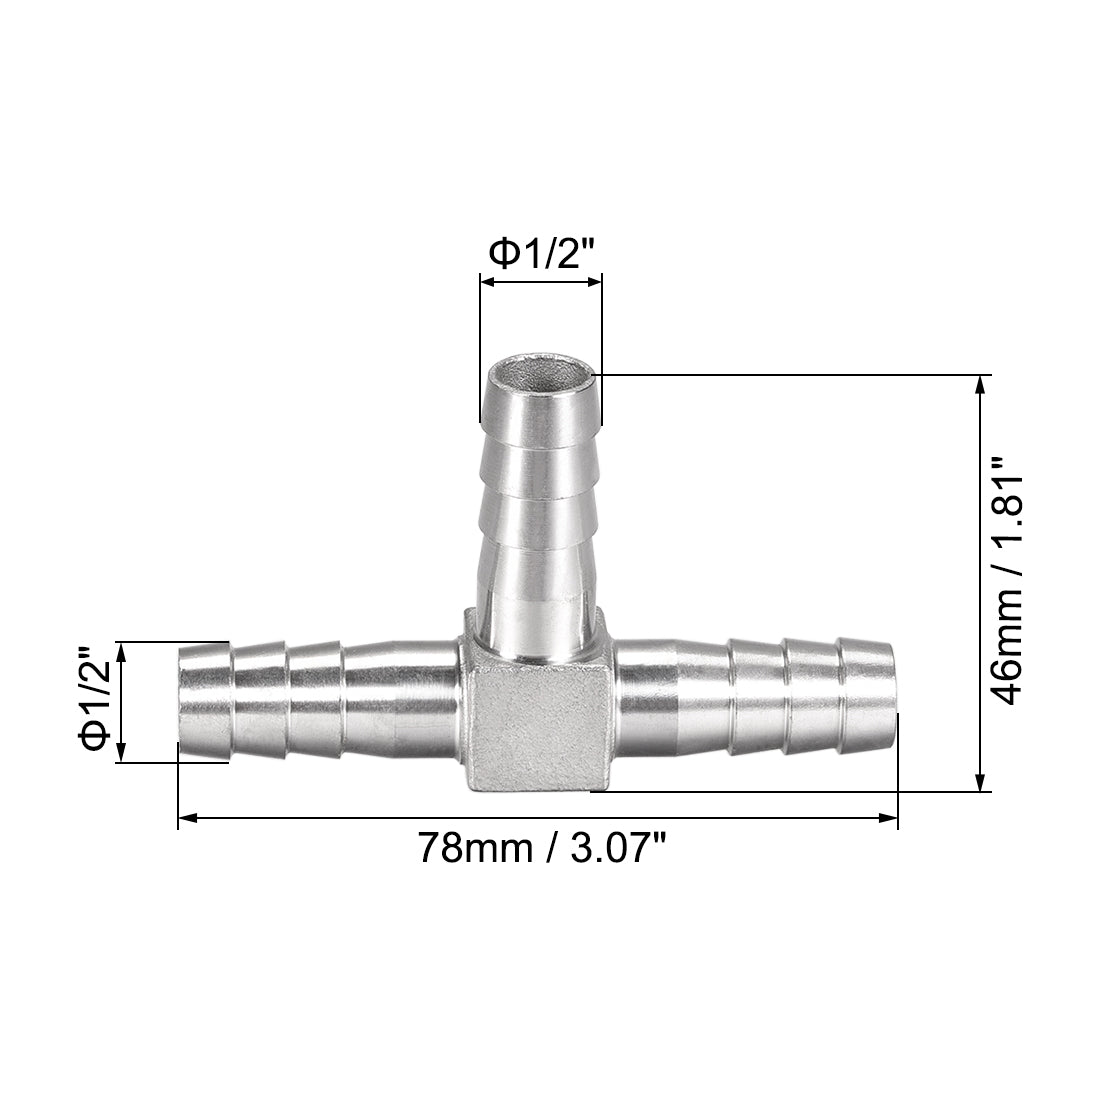 uxcell Uxcell 1/2-Inch (13mm) Hose ID Barb Fitting Stainless Steel 3 Way T-Shaped Union Home Brew Fitting 2pcs